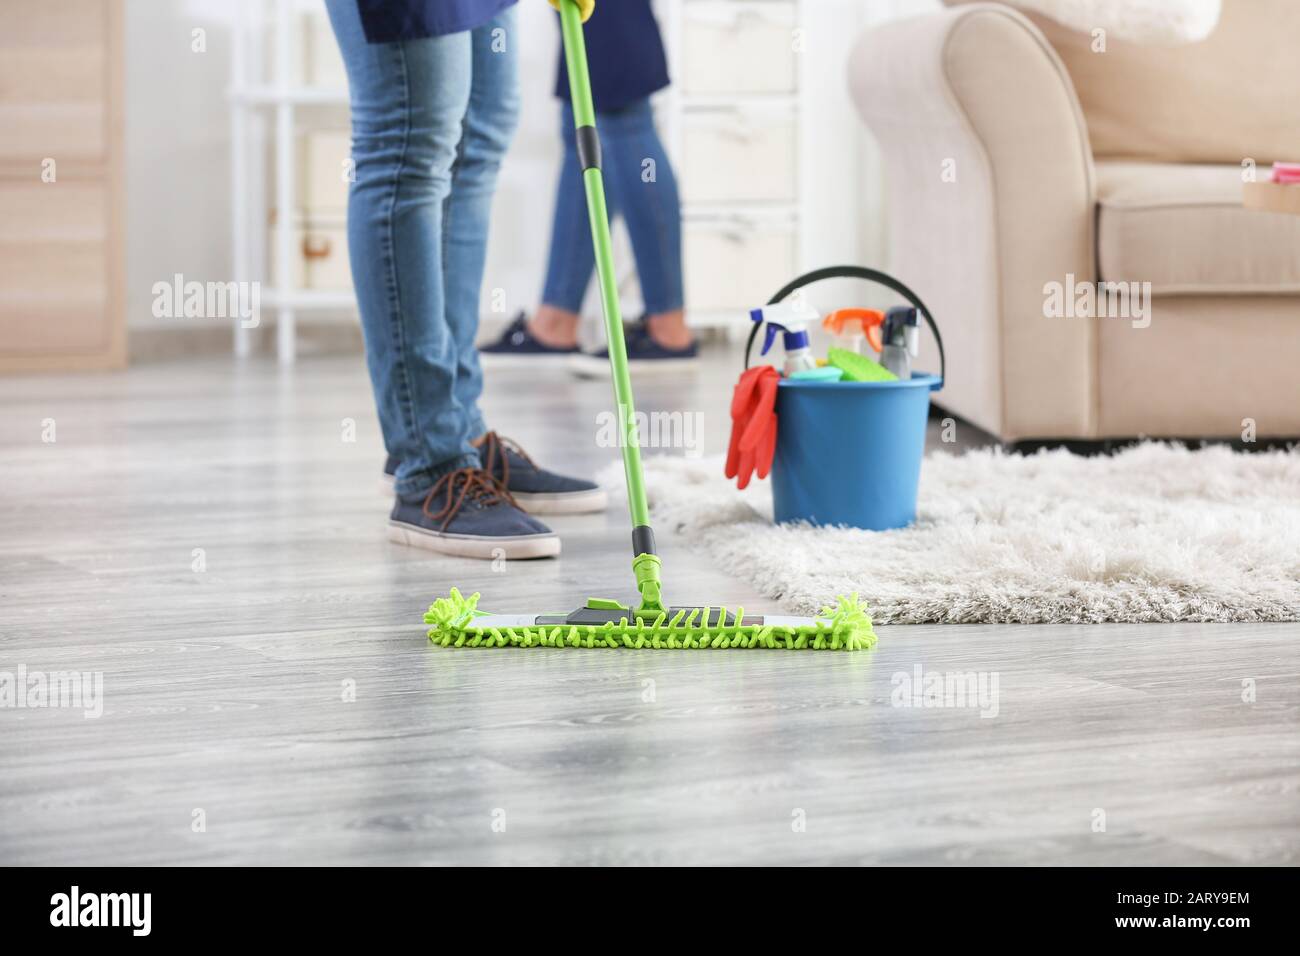 Male janitor mopping floor in room Stock Photo